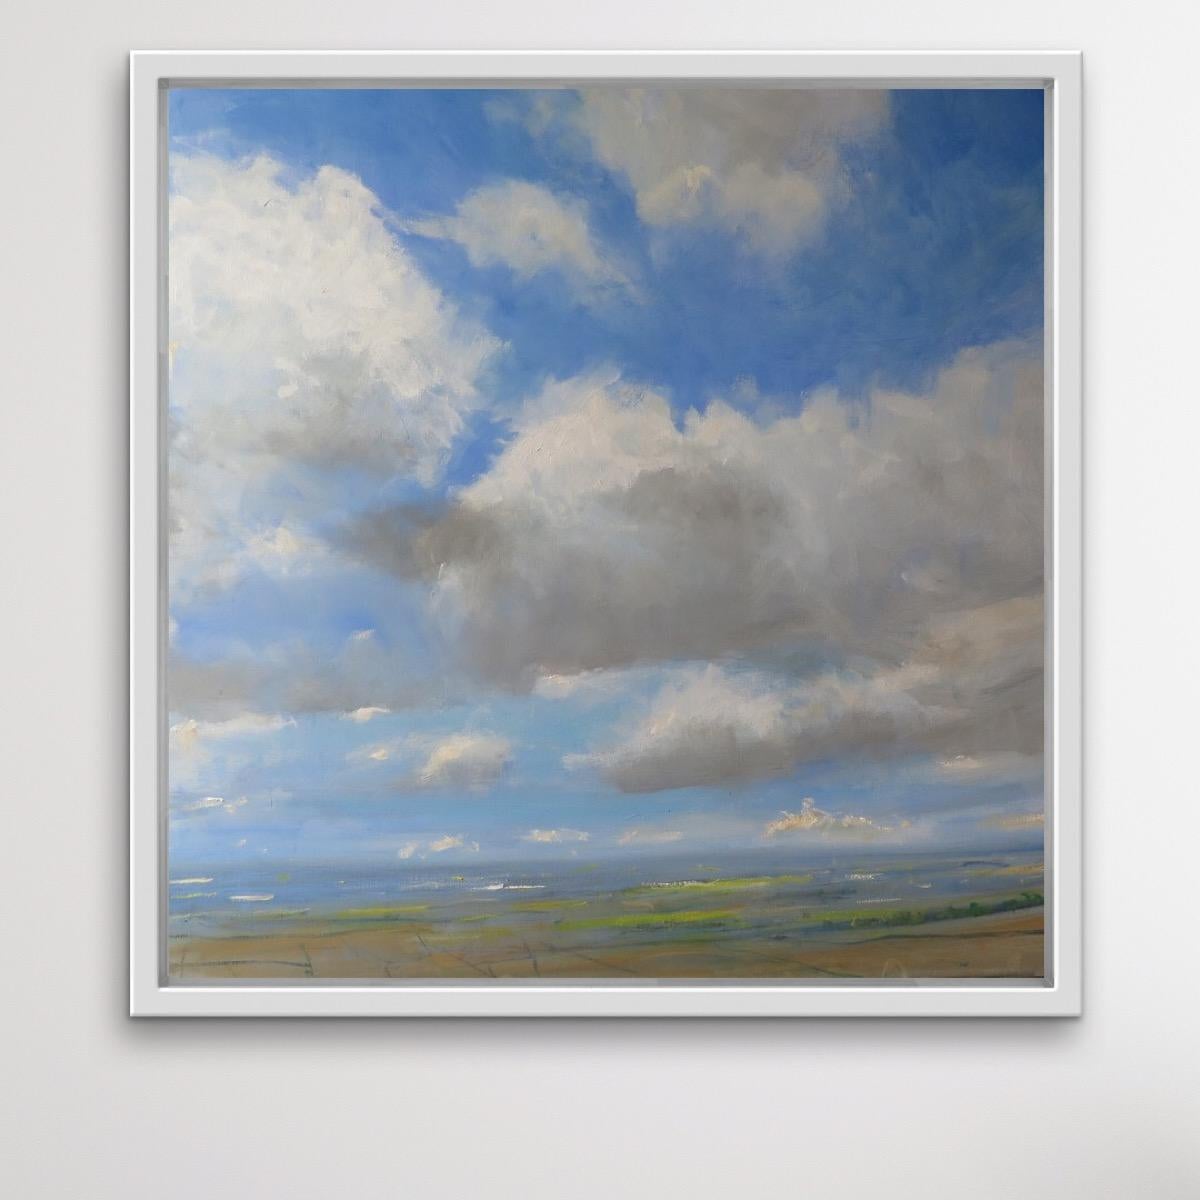 'View from the Wolds' is an original painting by Malcom Ludvigsen. It is a proper plein-air oil painting, painted on the spot from Garrowby Hill in the Yorkshire Wolds. It is unframed but painted round the edge and D-rings and chord are attached, so